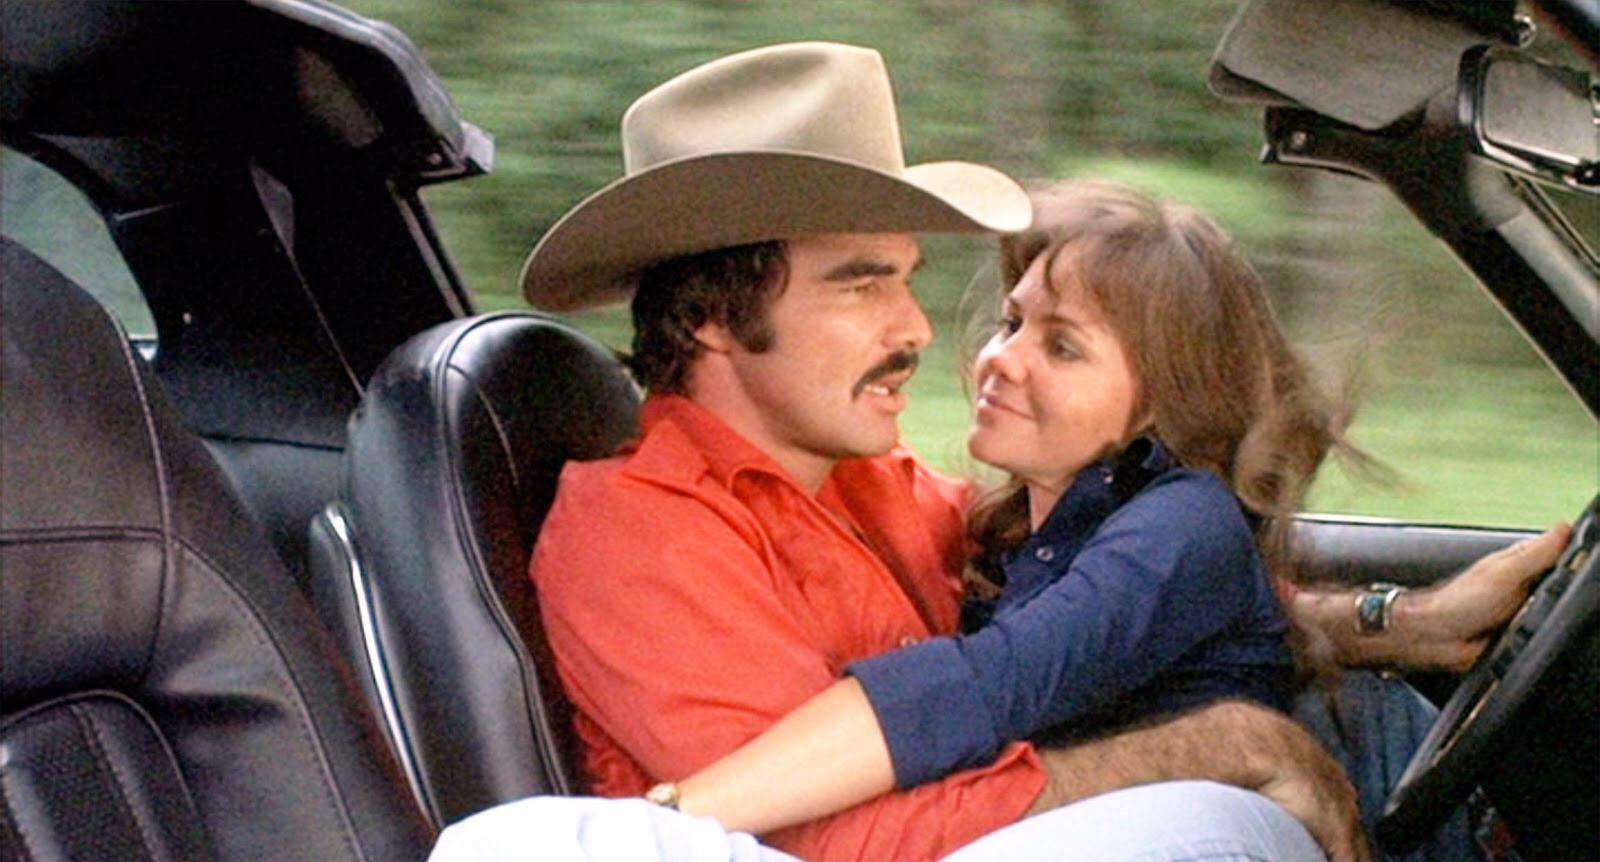  Burt Reynolds and Sally Field in Smokey and the Bandit (1977) 